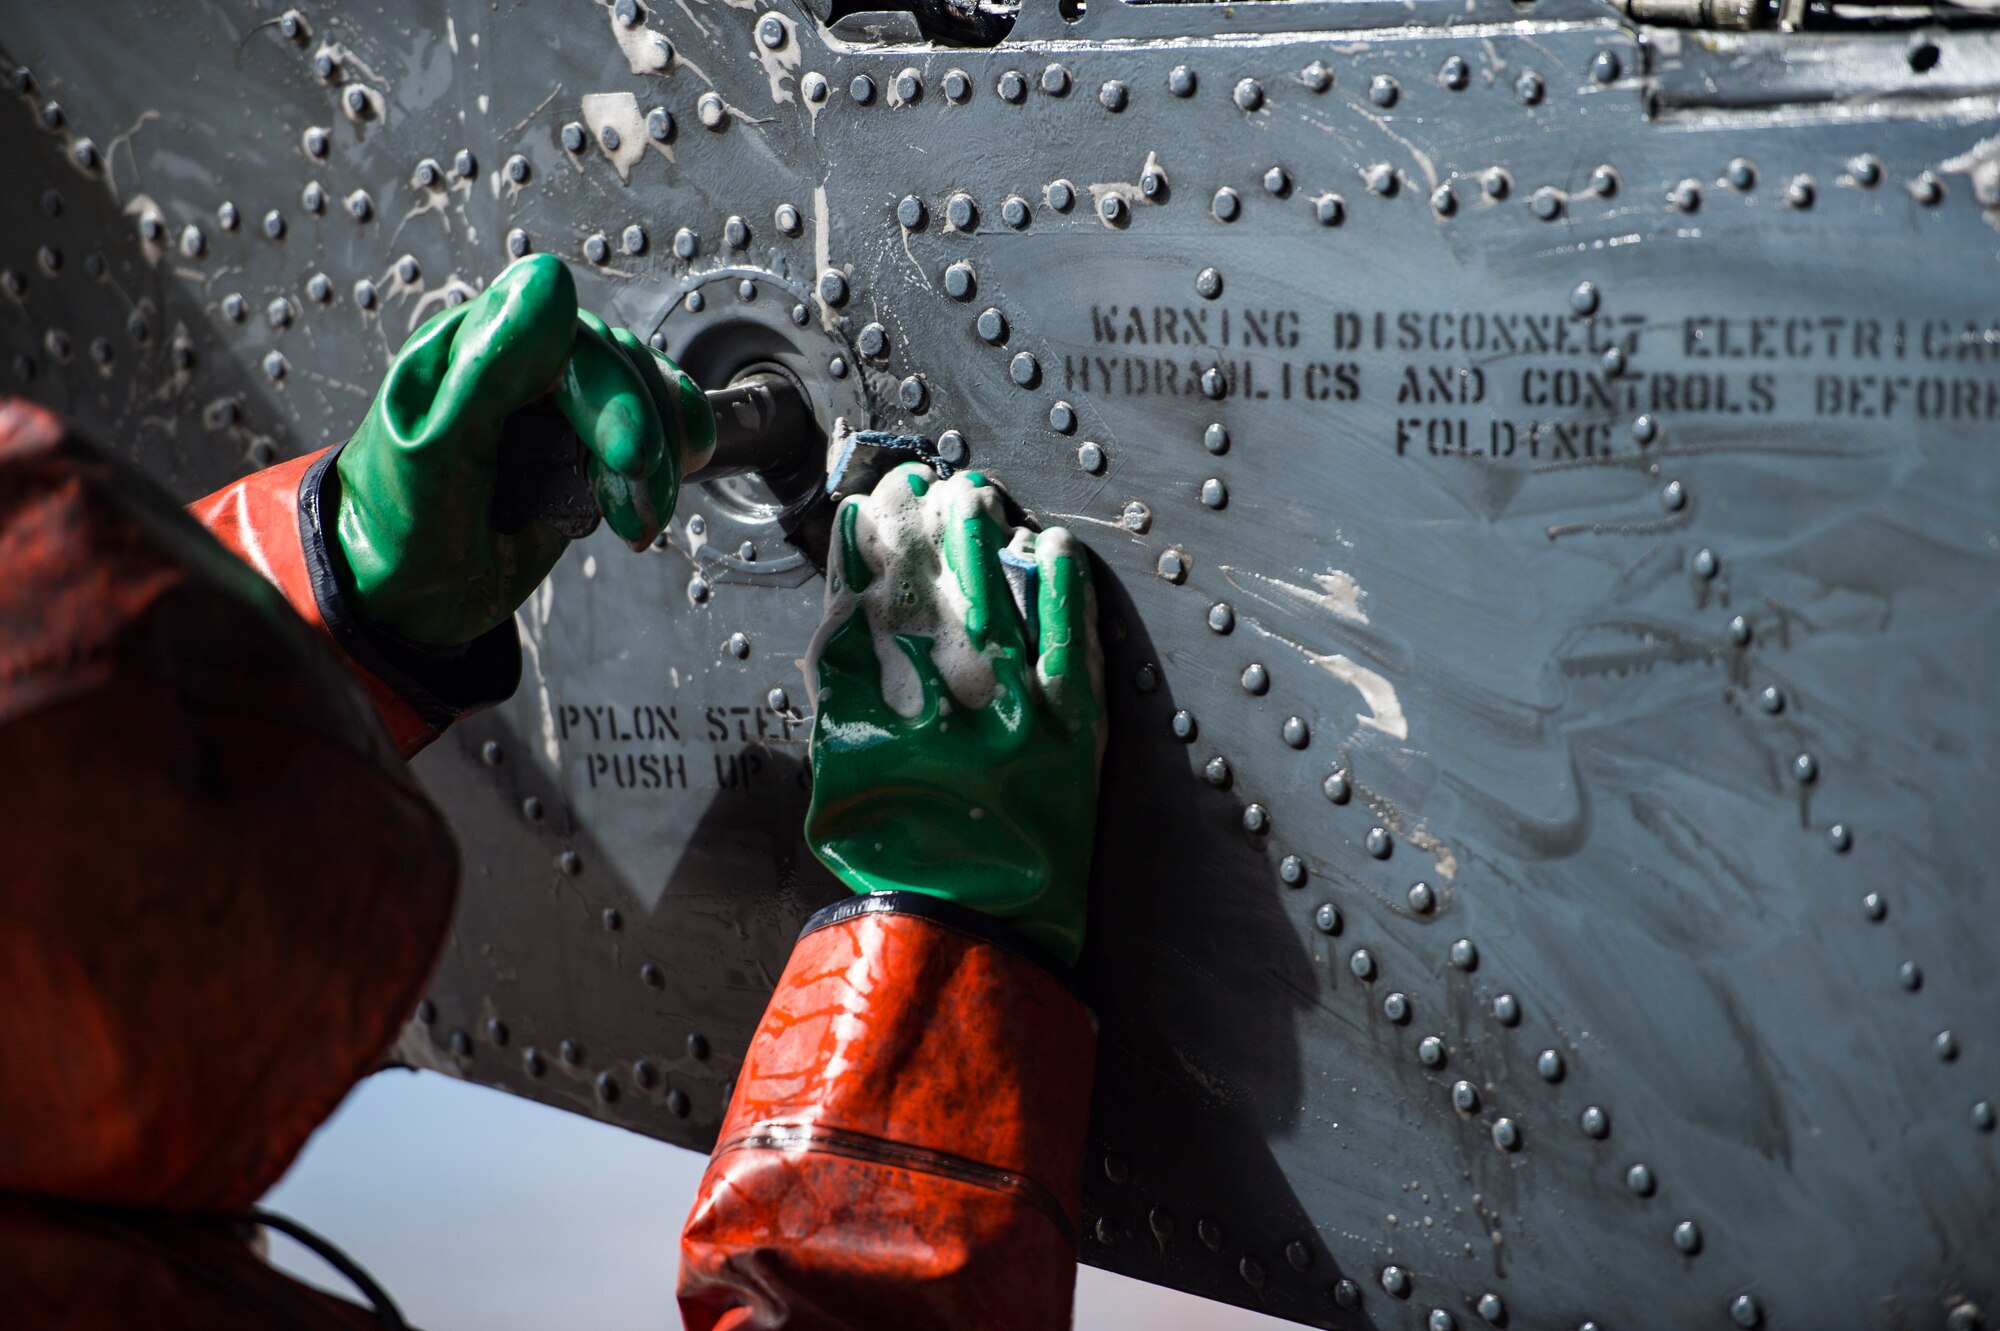 An Airman from the 41st Helicopter Maintenance Unit washes an HH-60G Pave Hawk, Feb. 20, 2018, at Moody Air Force Base, Ga. Airmen are required to wash the helicopters every 180 days to control corrosion caused by oil, dirt and grime. Washing paired with mechanical and electrical maintenance help Airmen ensure the Pave Hawks are ready at a moment’s notice. (U.S. Air Force photo by Senior Airman Janiqua P. Robinson)